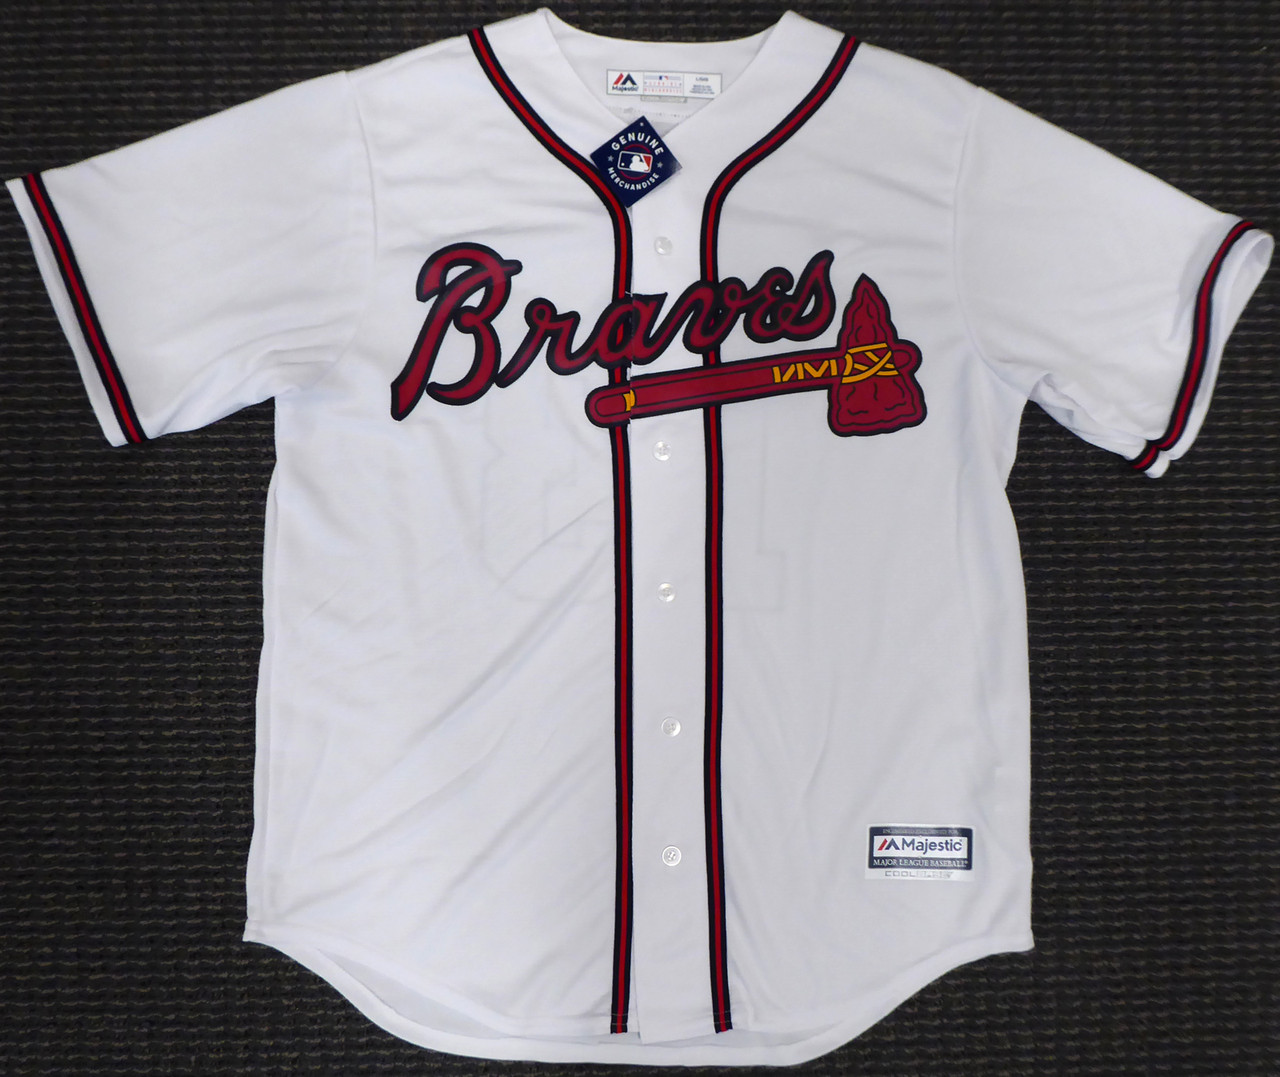 Mens Majestic - Braves Lopez #8 Jersey 2XL White Made in USA